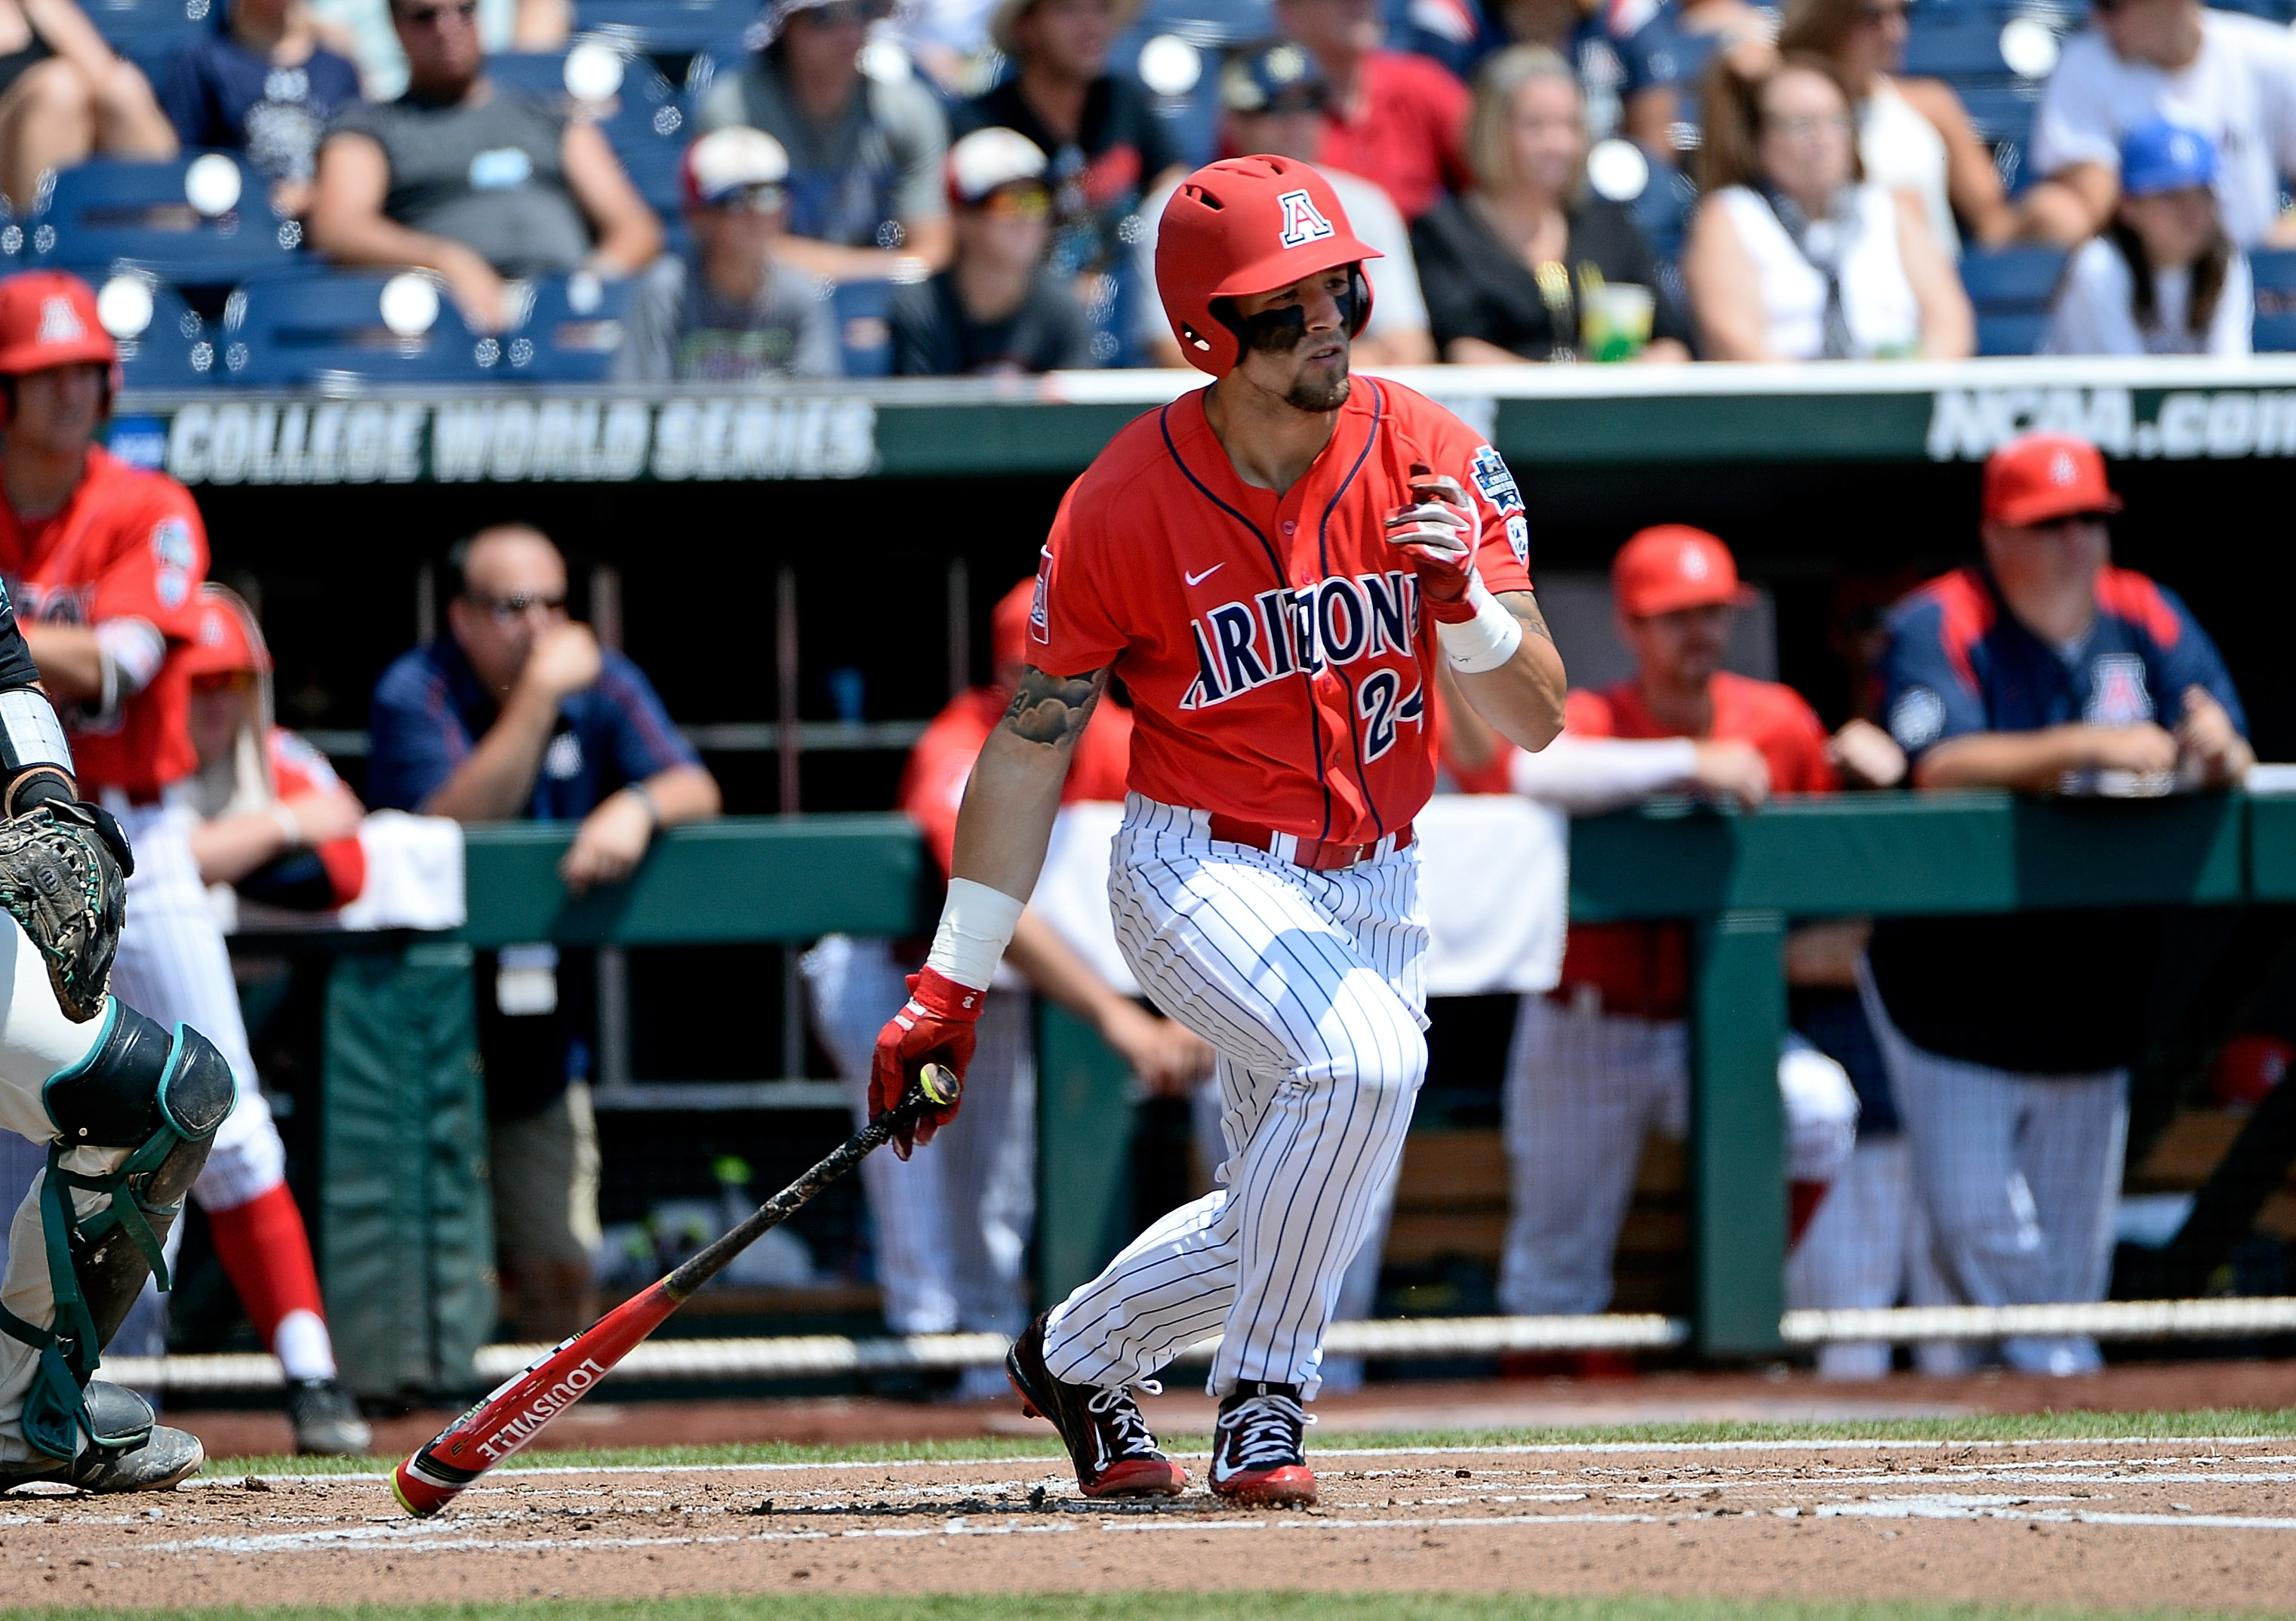 Arizona's JJ Matijevic gets Drafted 75th Overall to the Astros3042 x 2148